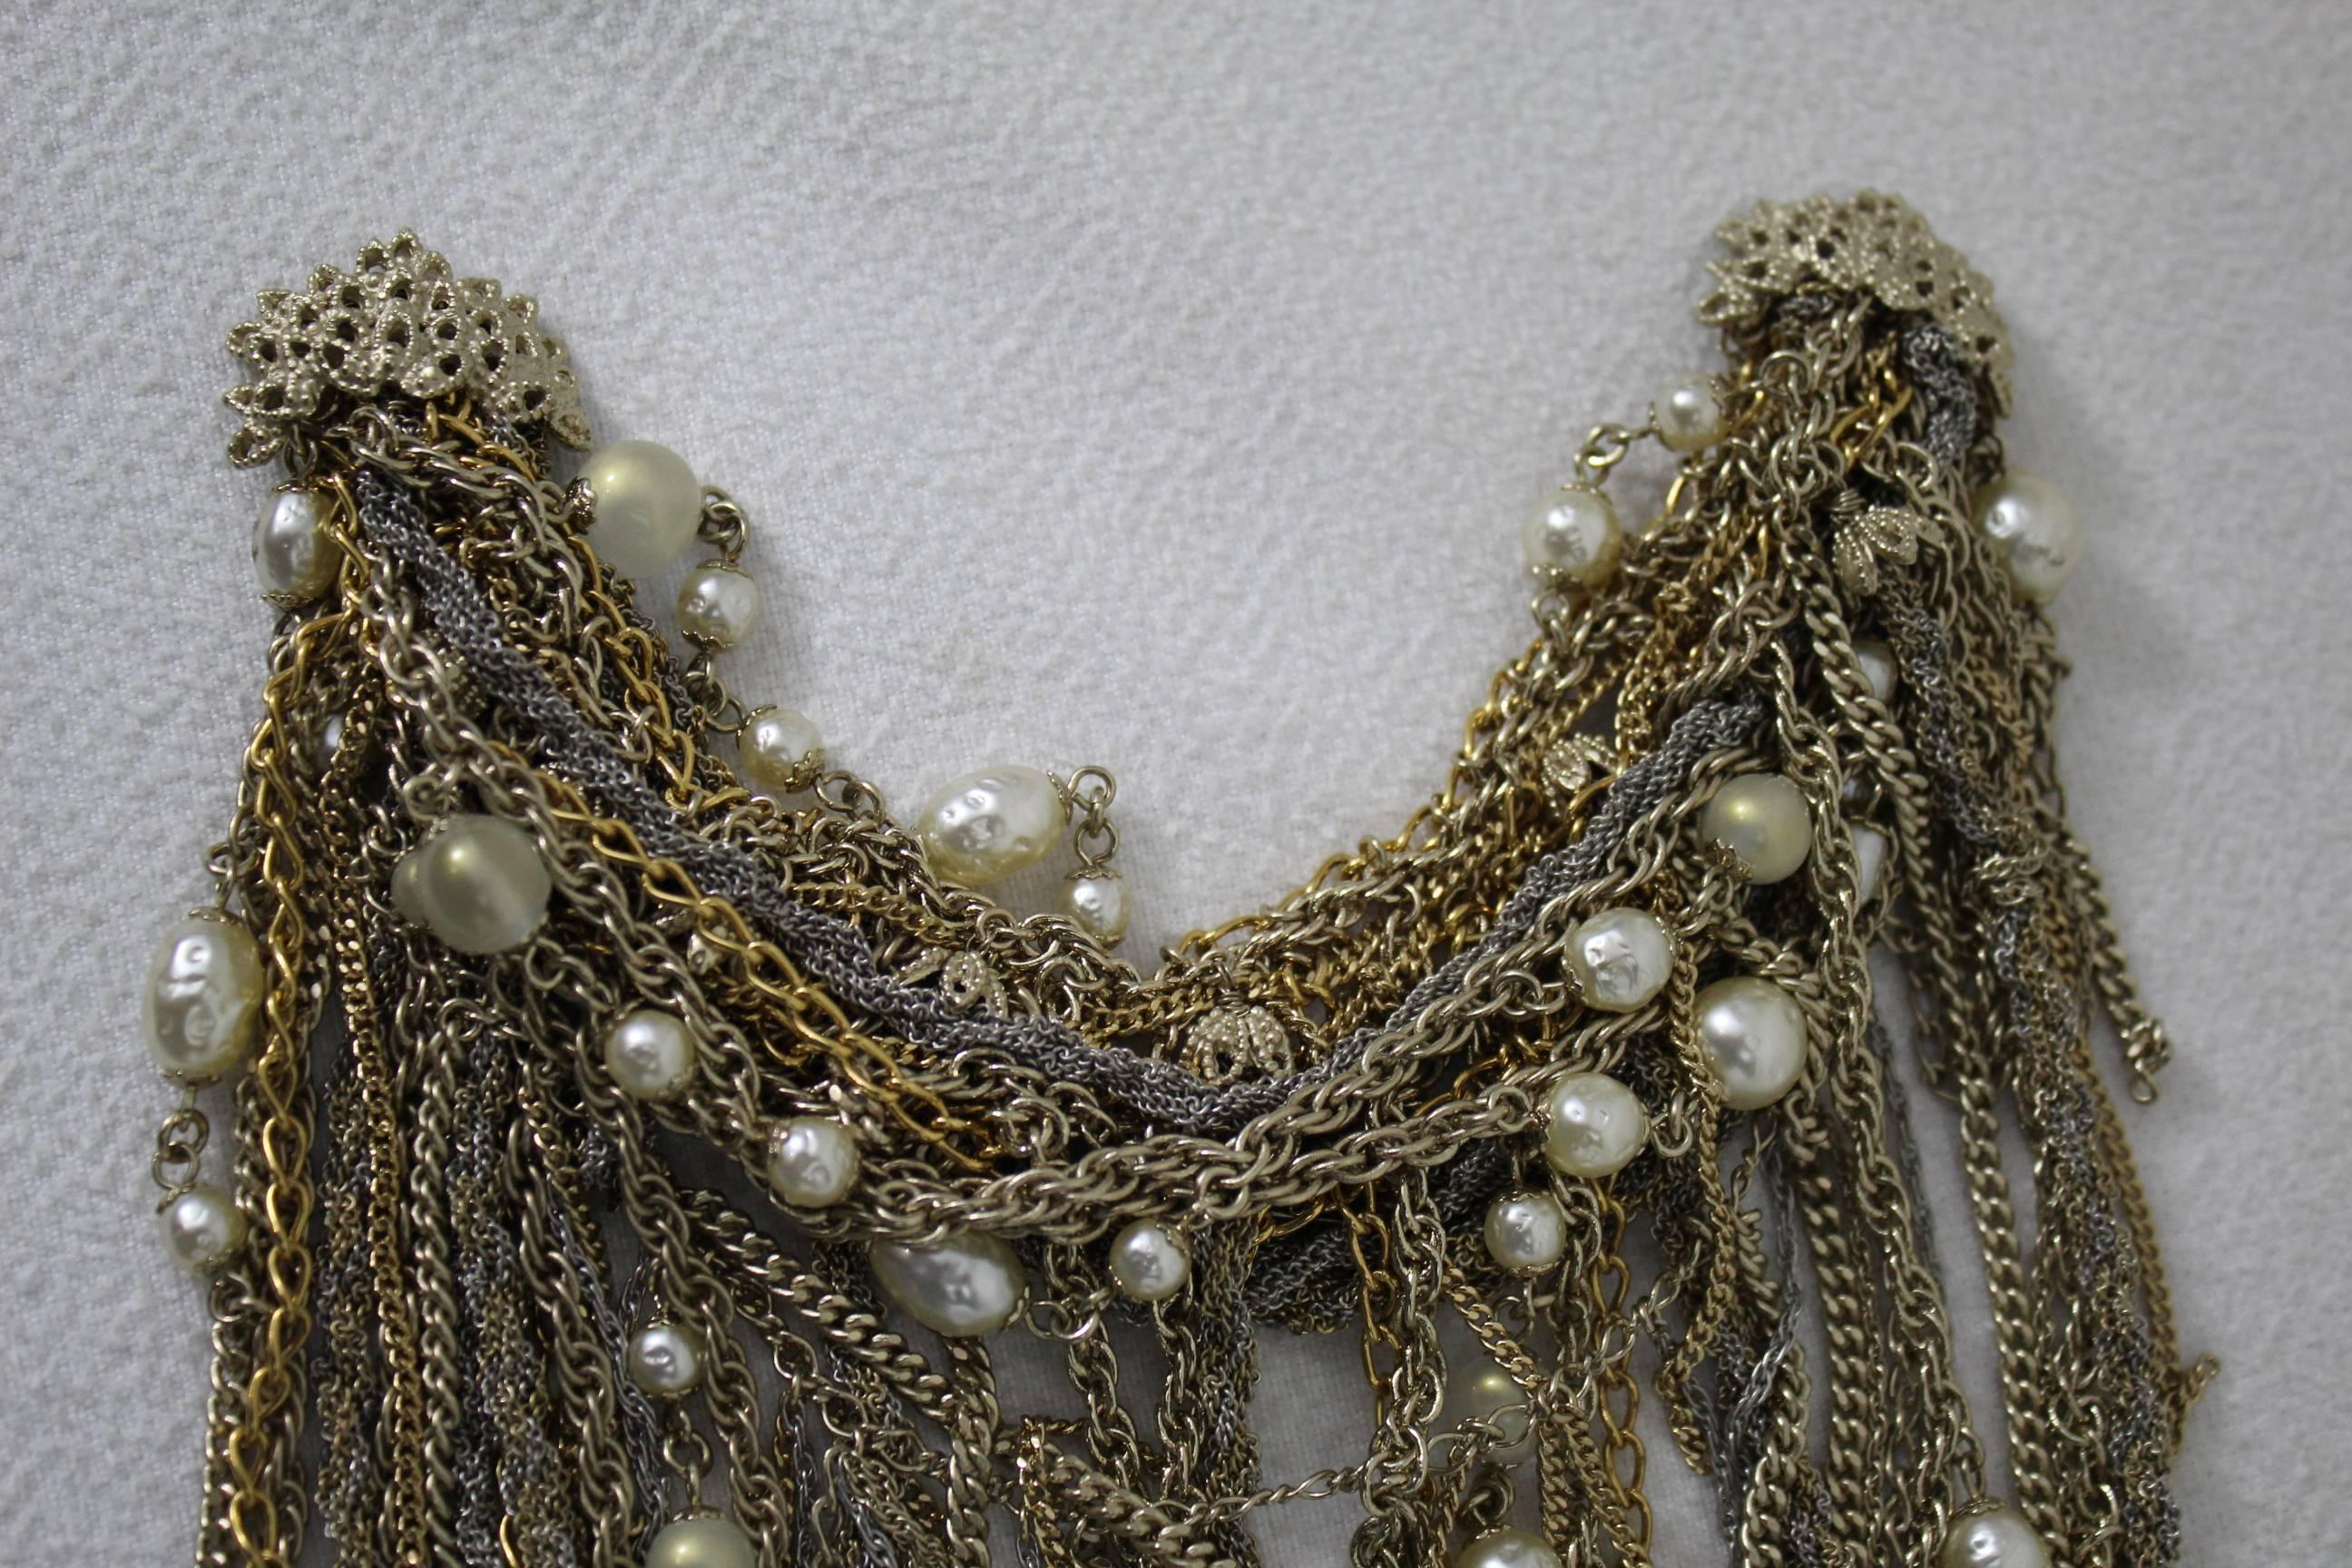 Really nice Golden Chanel Maxi brocche ( it is suspended by 3 safety pins) Representing a necklace or a collar for a shirt.

excellent condition, used just for an internal Chanel show.

No plaque in the back

Hold by 33 safety pins